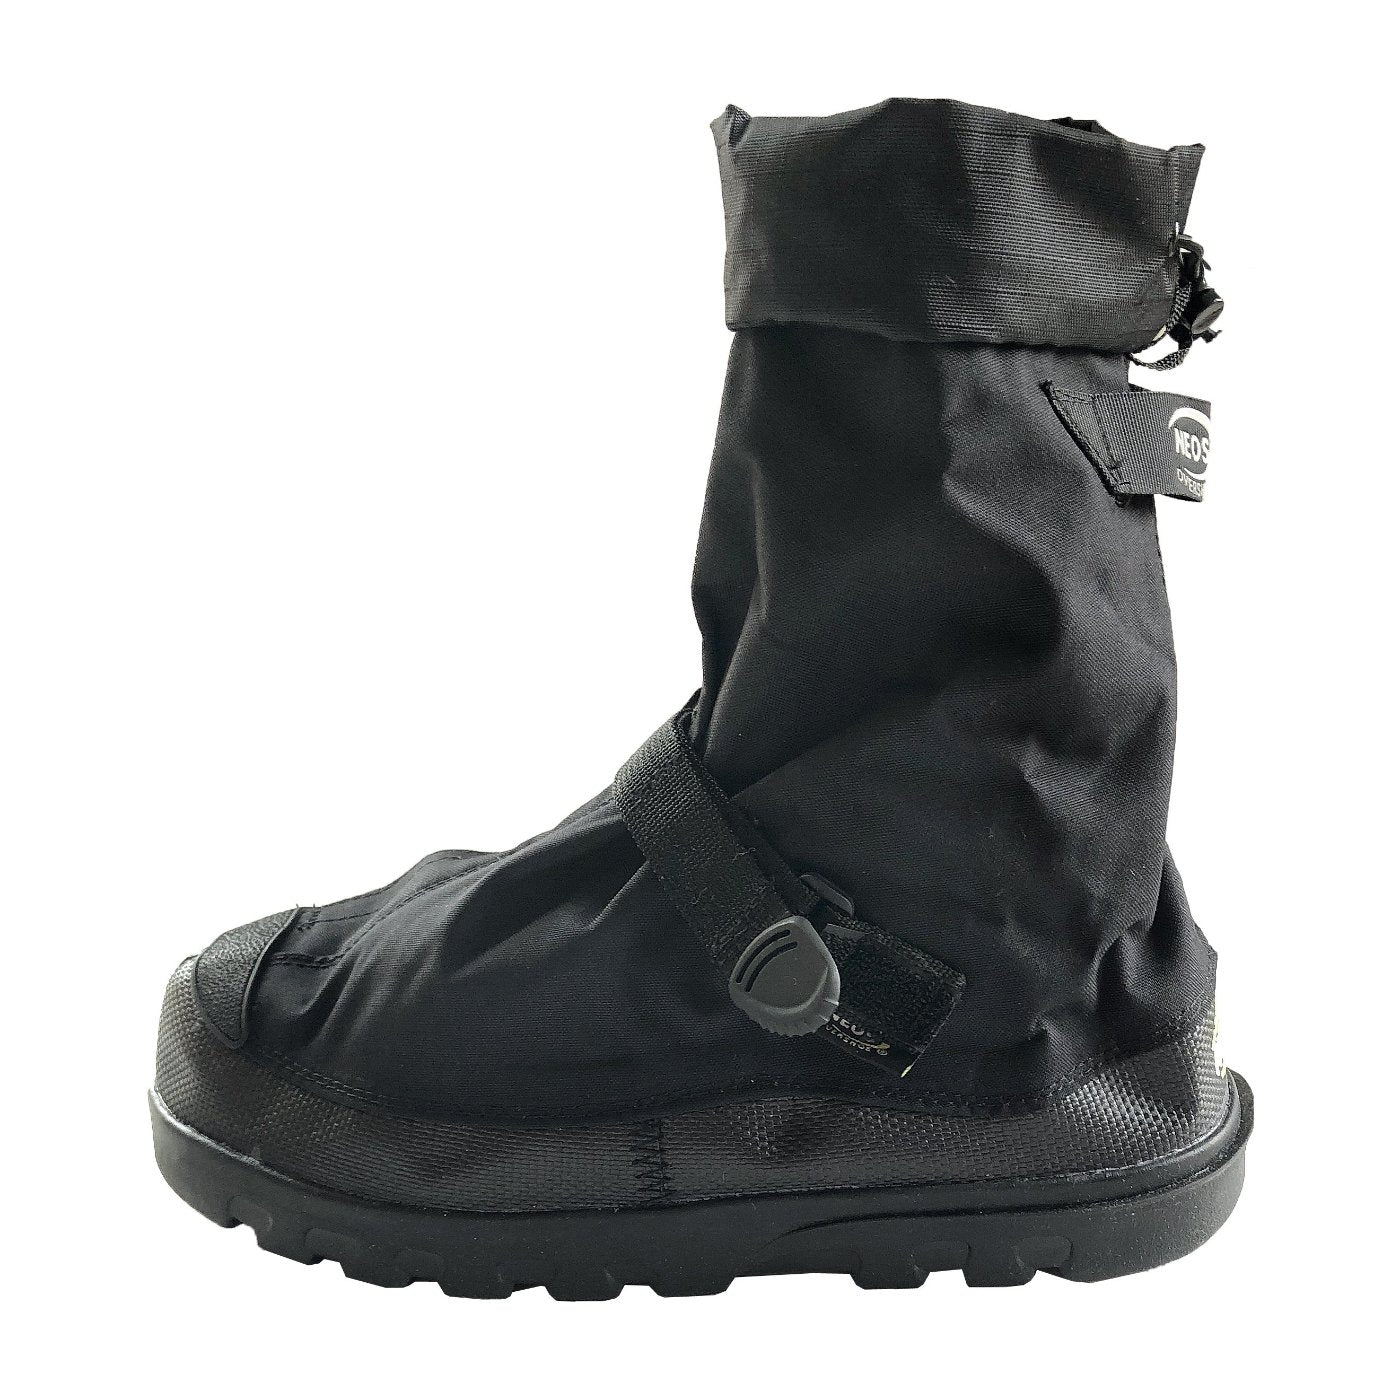 Voyager Mid Overshoes